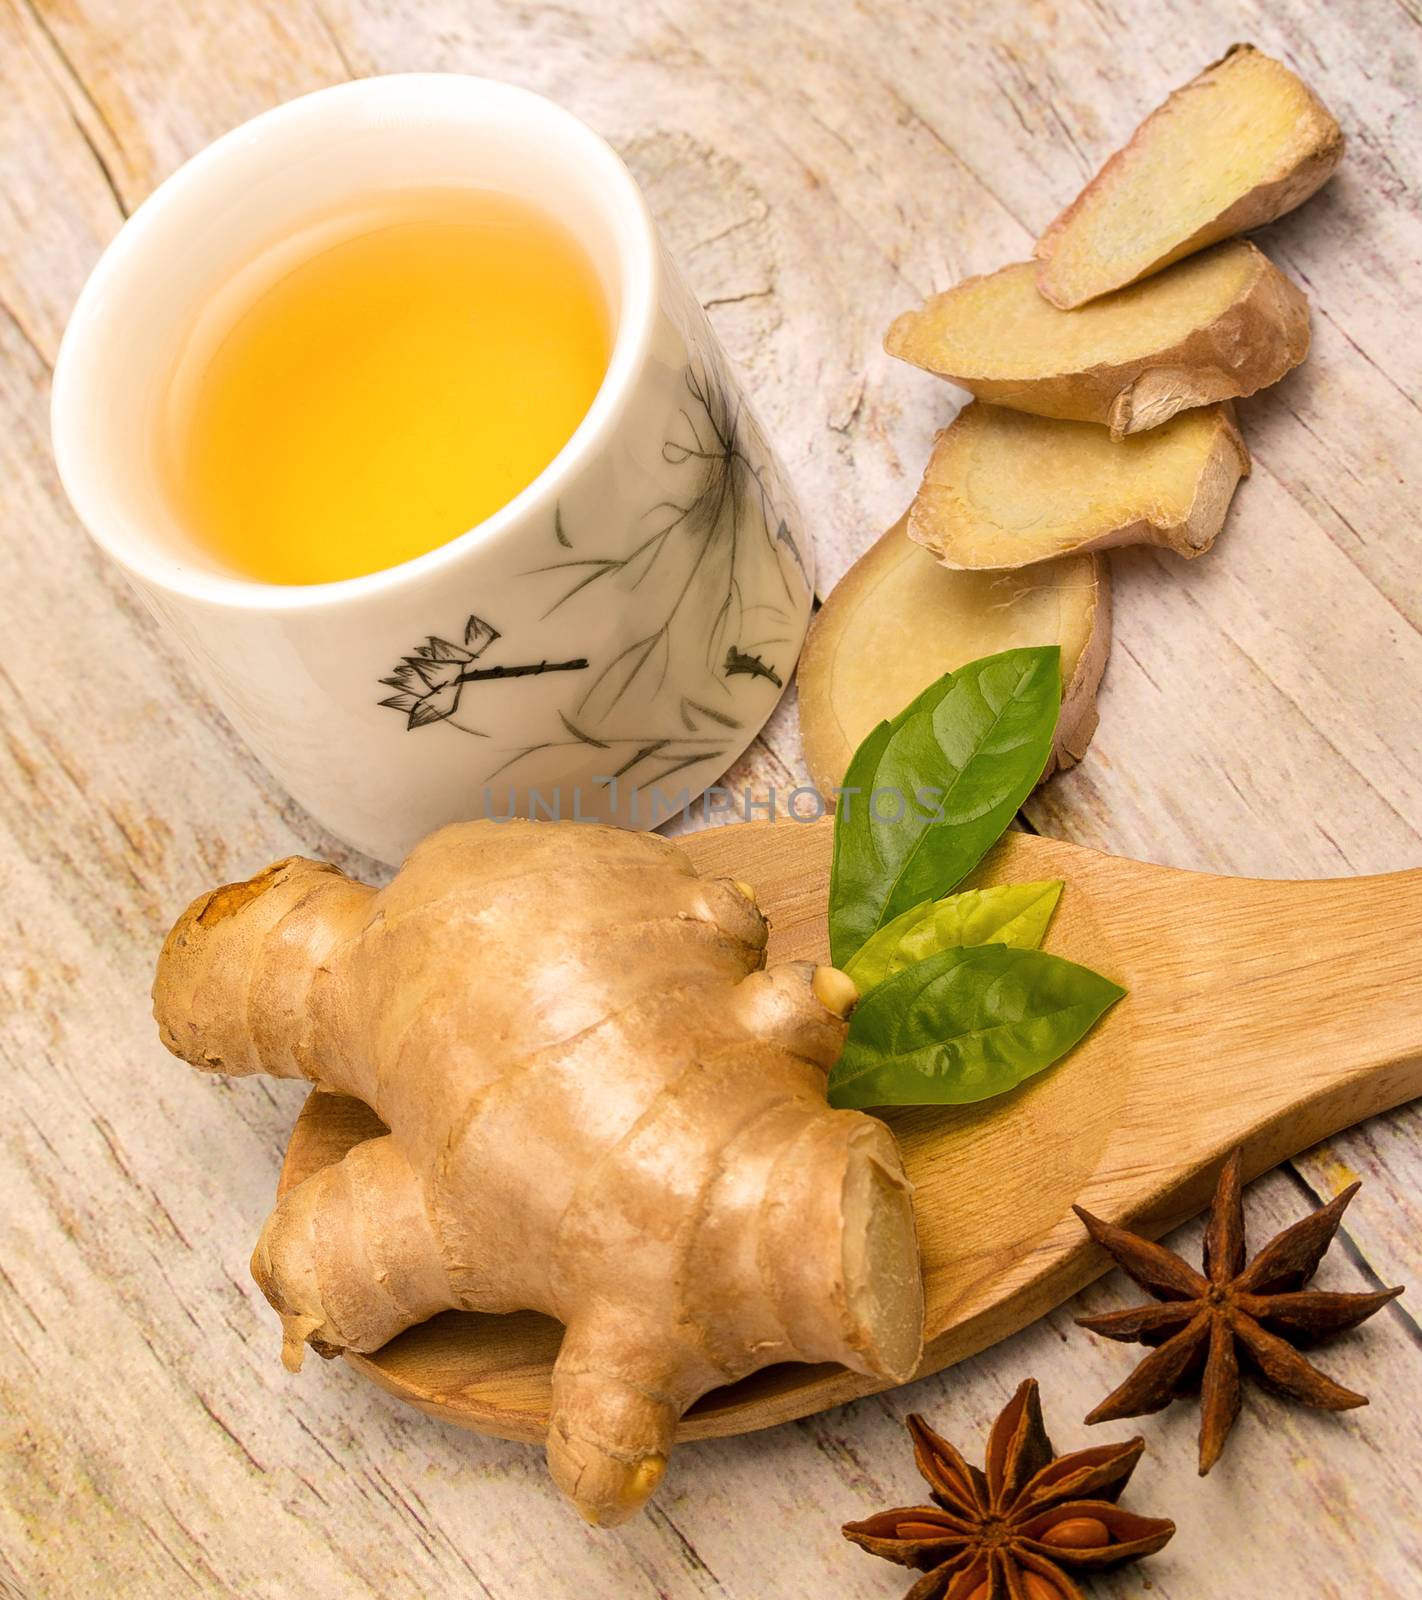 Japanese Ginger Tea Indicating Refreshed Herbal And Spices